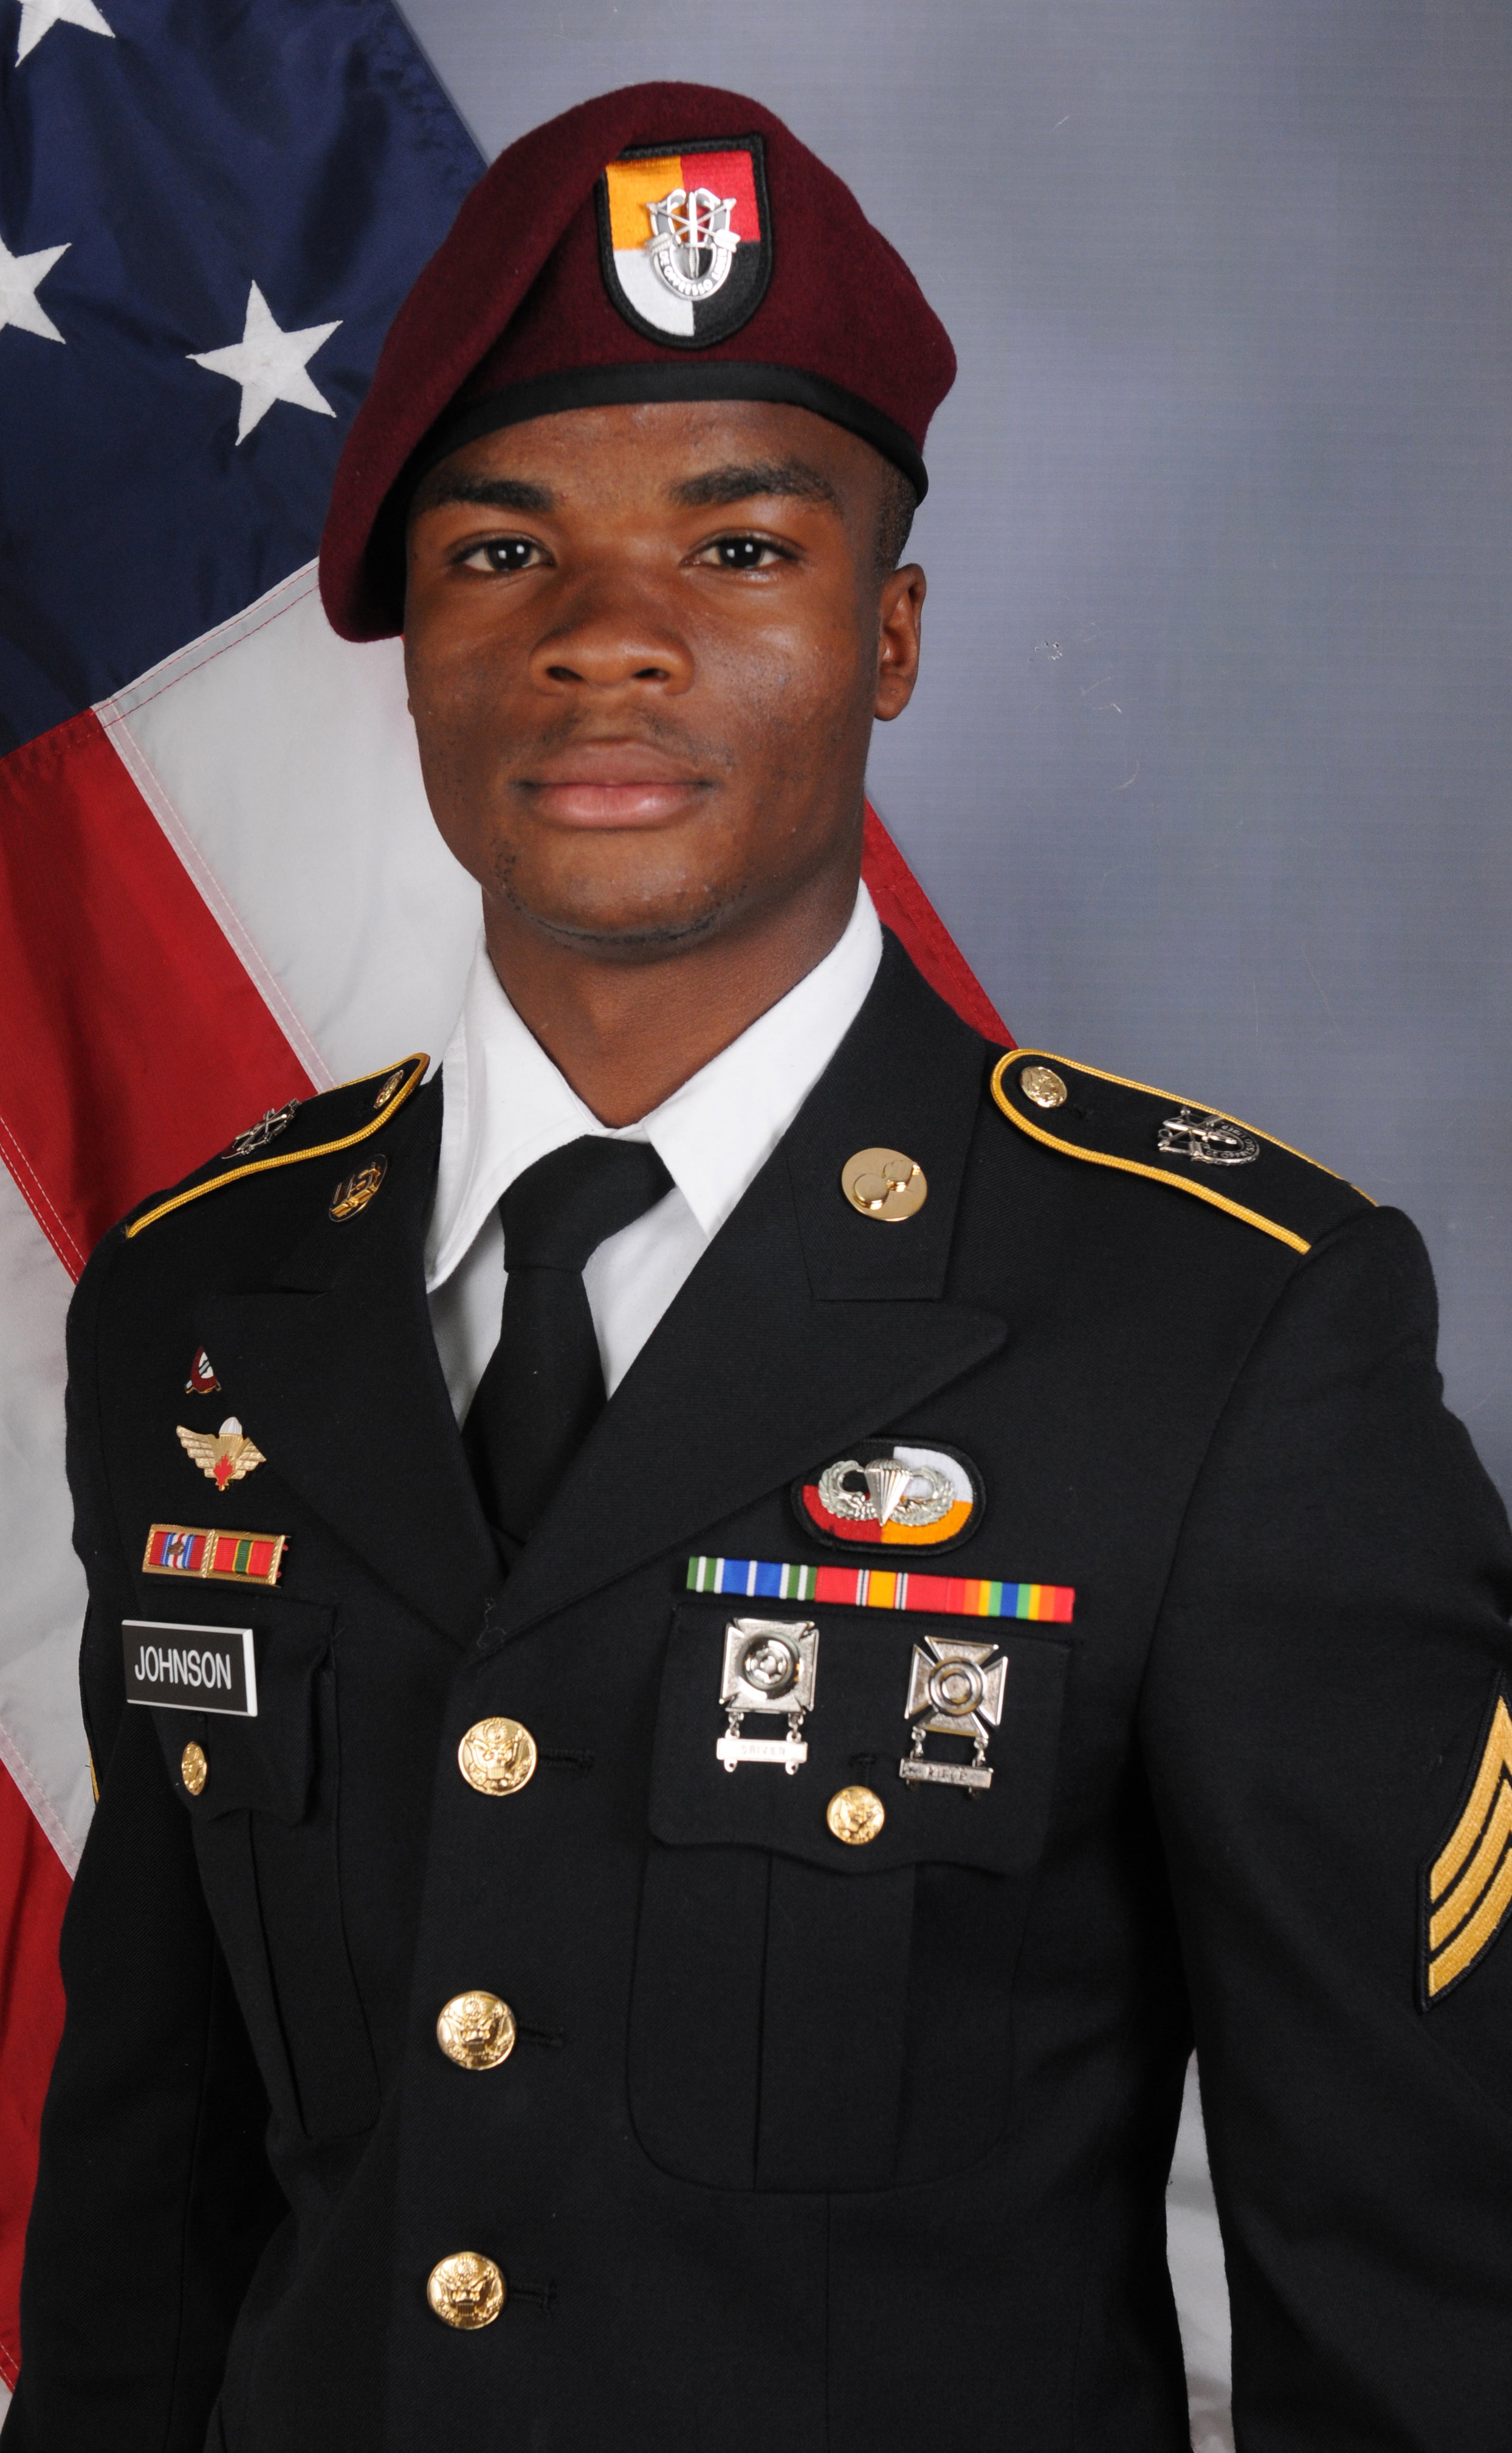 Funeral Held for Sgt. La David Johnson, Soldier at Center of Donald Trump Fight